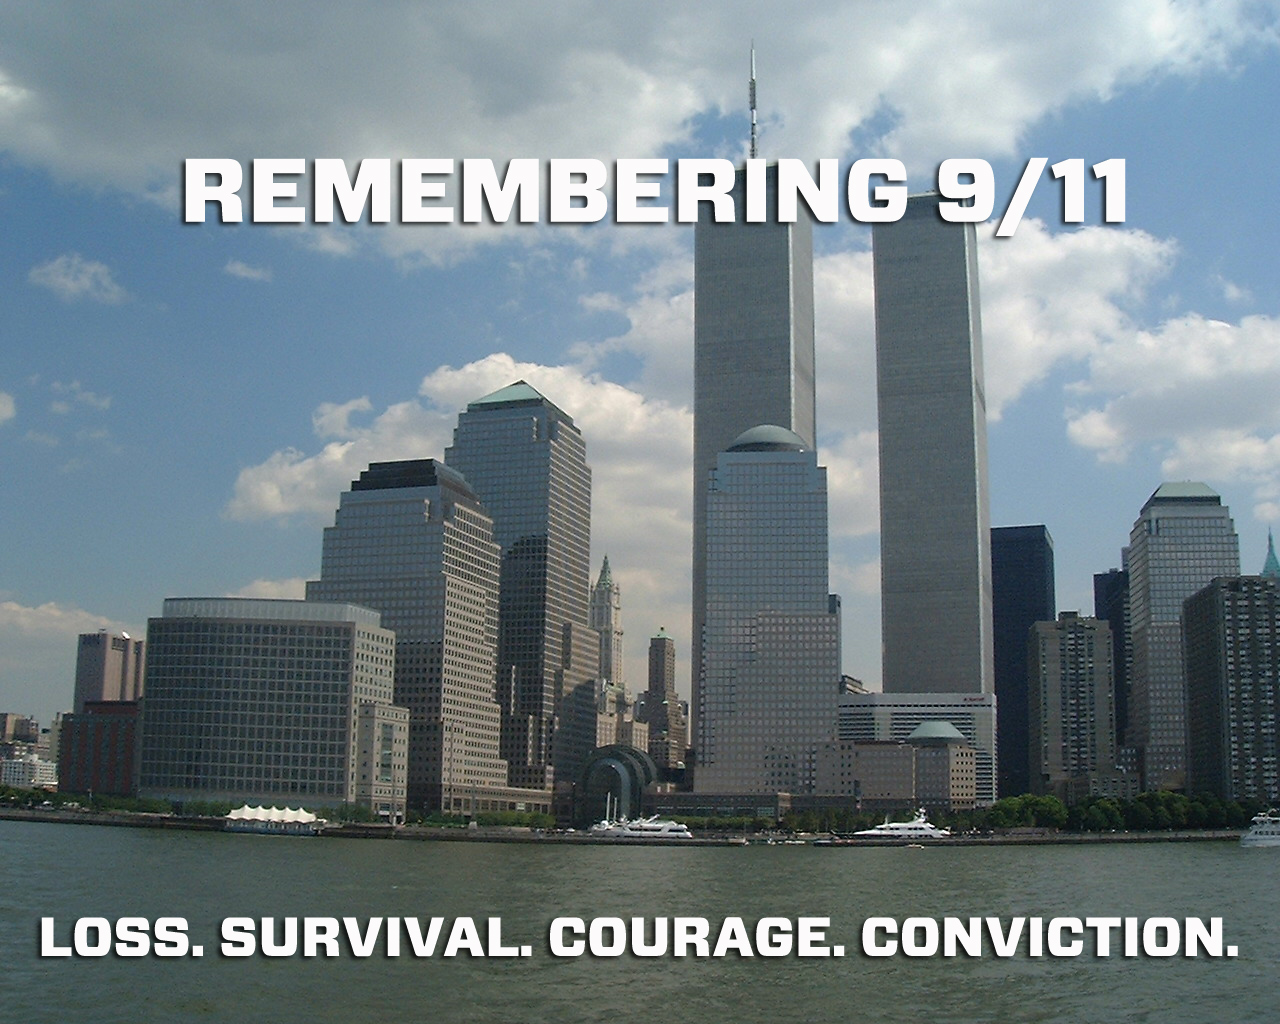 Geek insider, geekinsider, geekinsider. Com,, 9/11: the day that changed the world forever, living